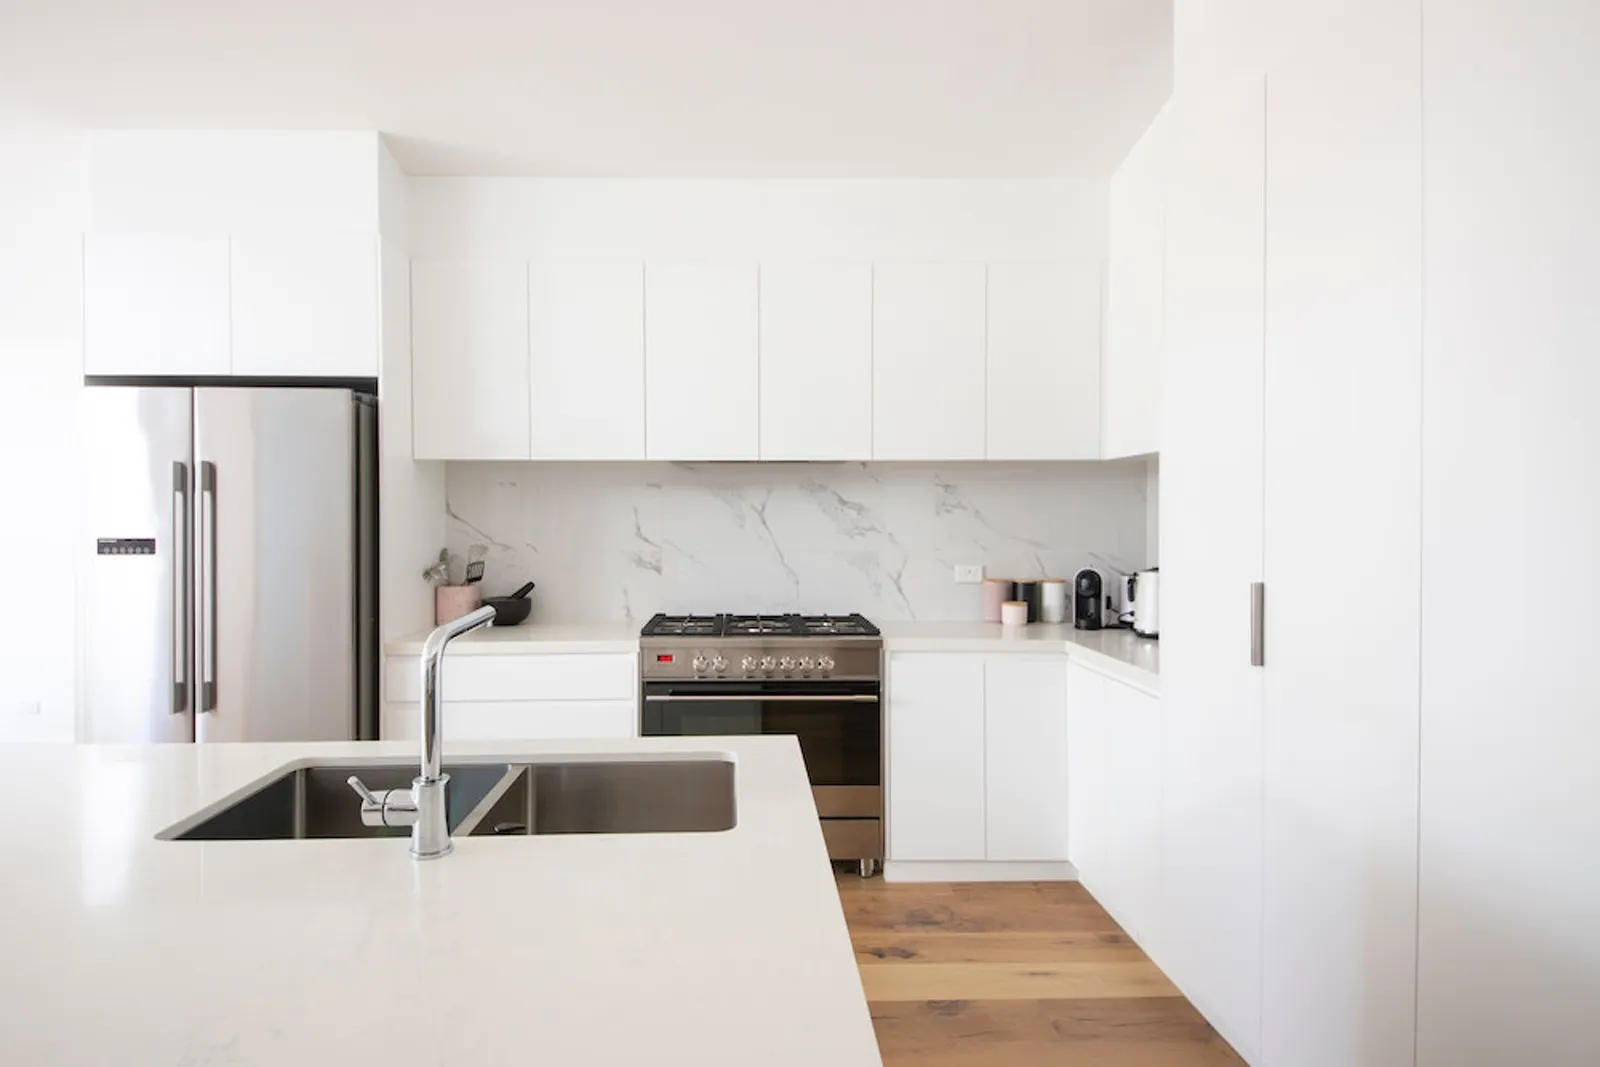 Discover 18 minimalistic kitchen ideas that will inspire you to ...